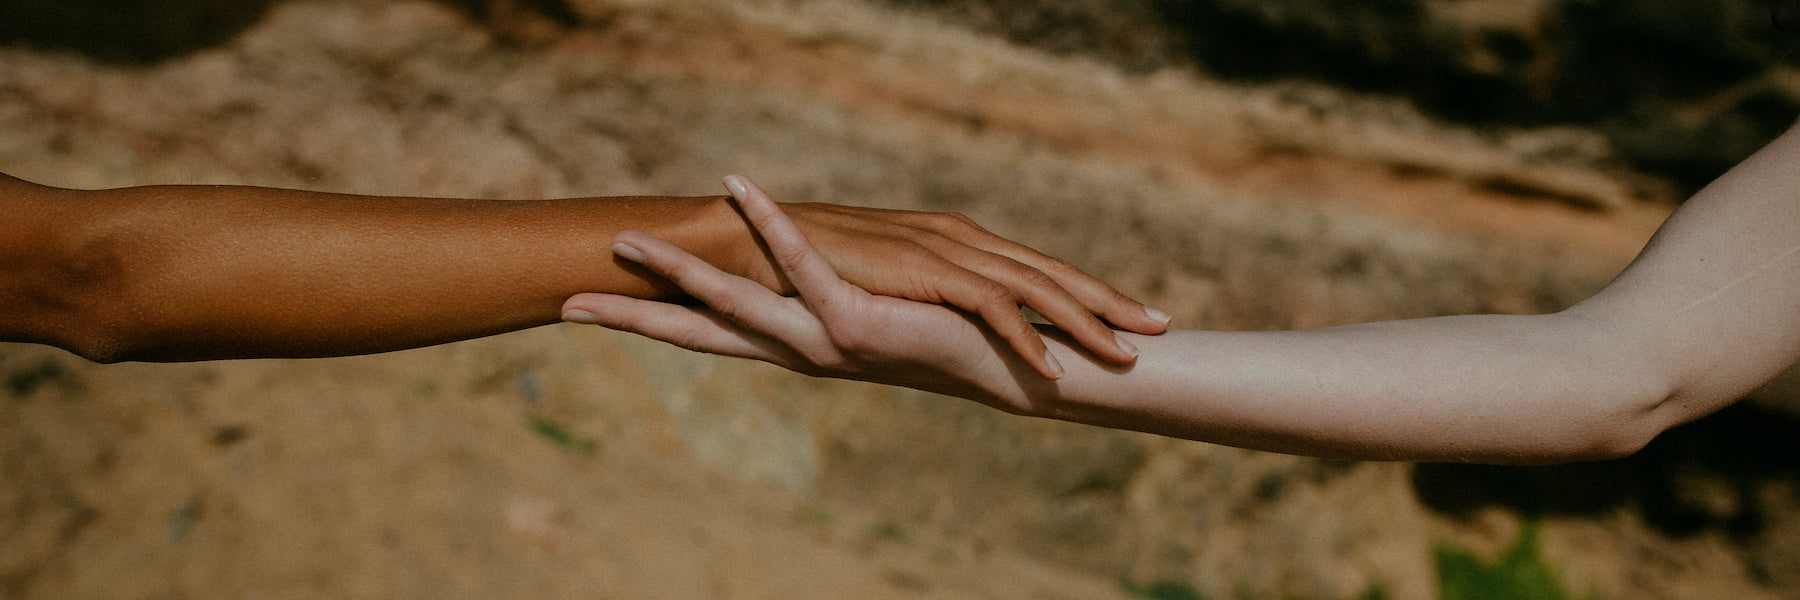 two female arms of different ethnicity stretched out touching each other